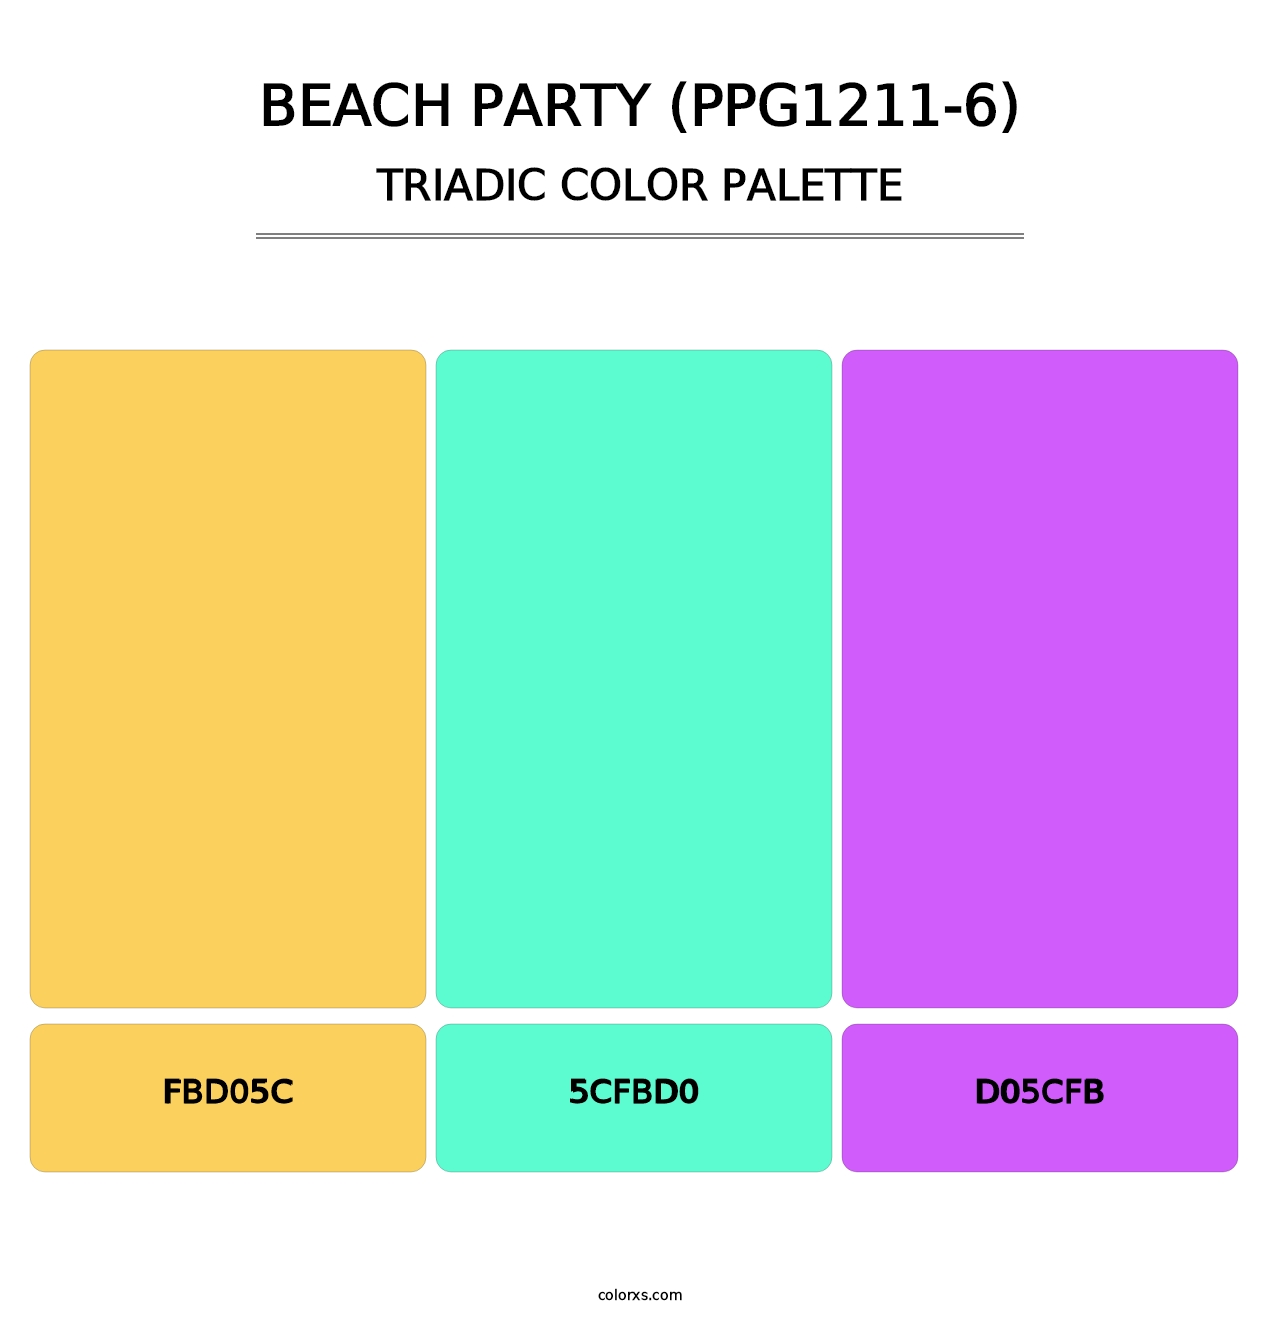 Beach Party (PPG1211-6) - Triadic Color Palette